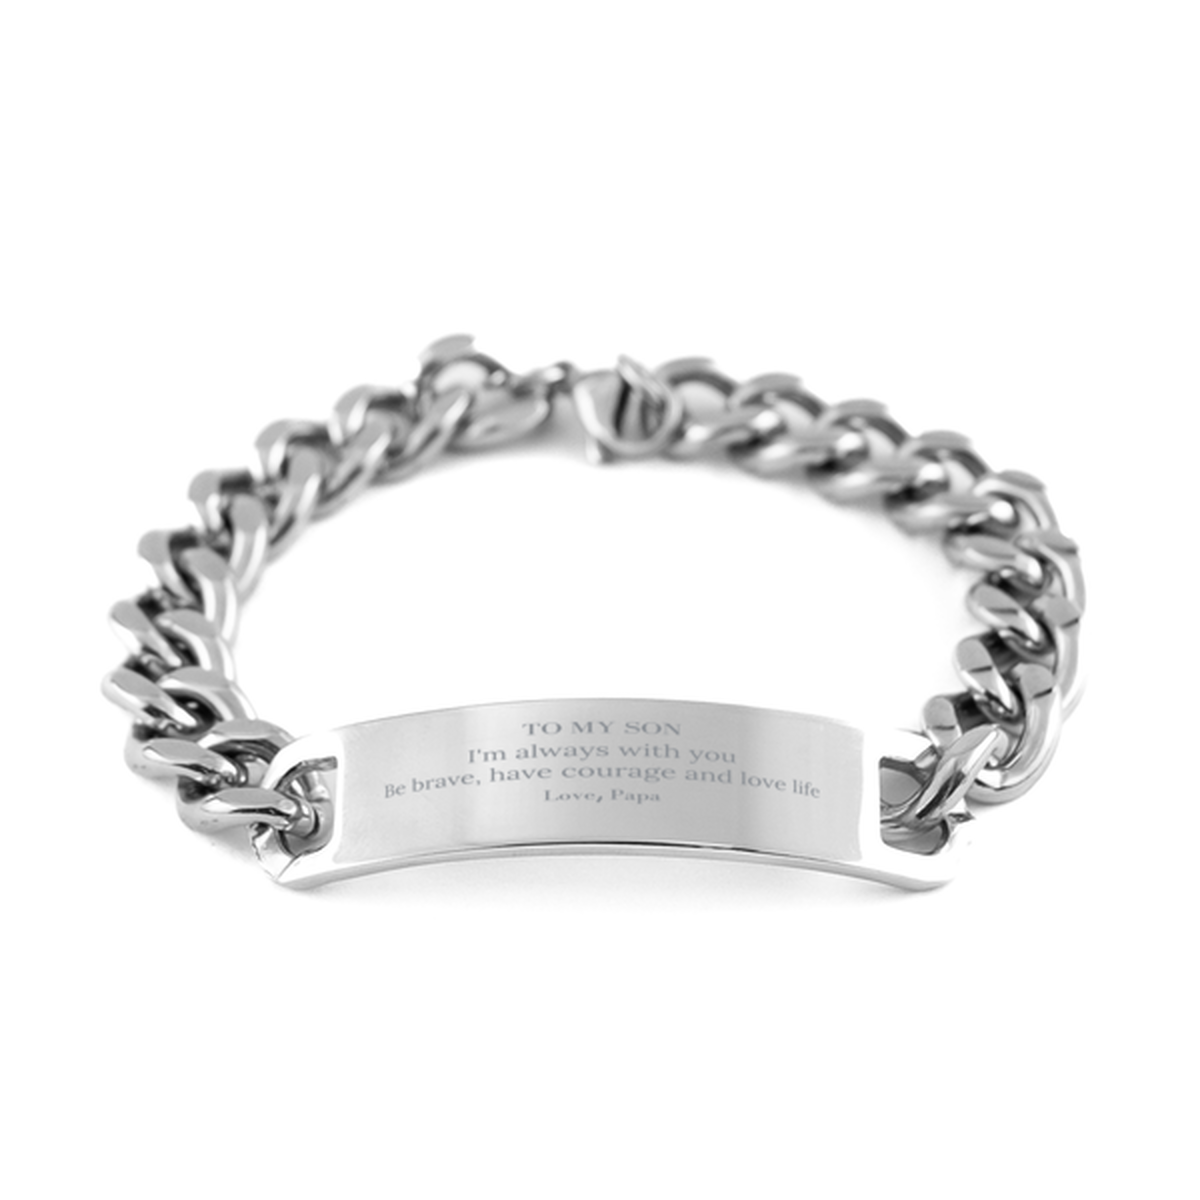 To My Son Gifts from Papa, Unique Cuban Chain Stainless Steel Bracelet Inspirational Christmas Birthday Graduation Gifts for Son I'm always with you. Be brave, have courage and love life. Love, Papa